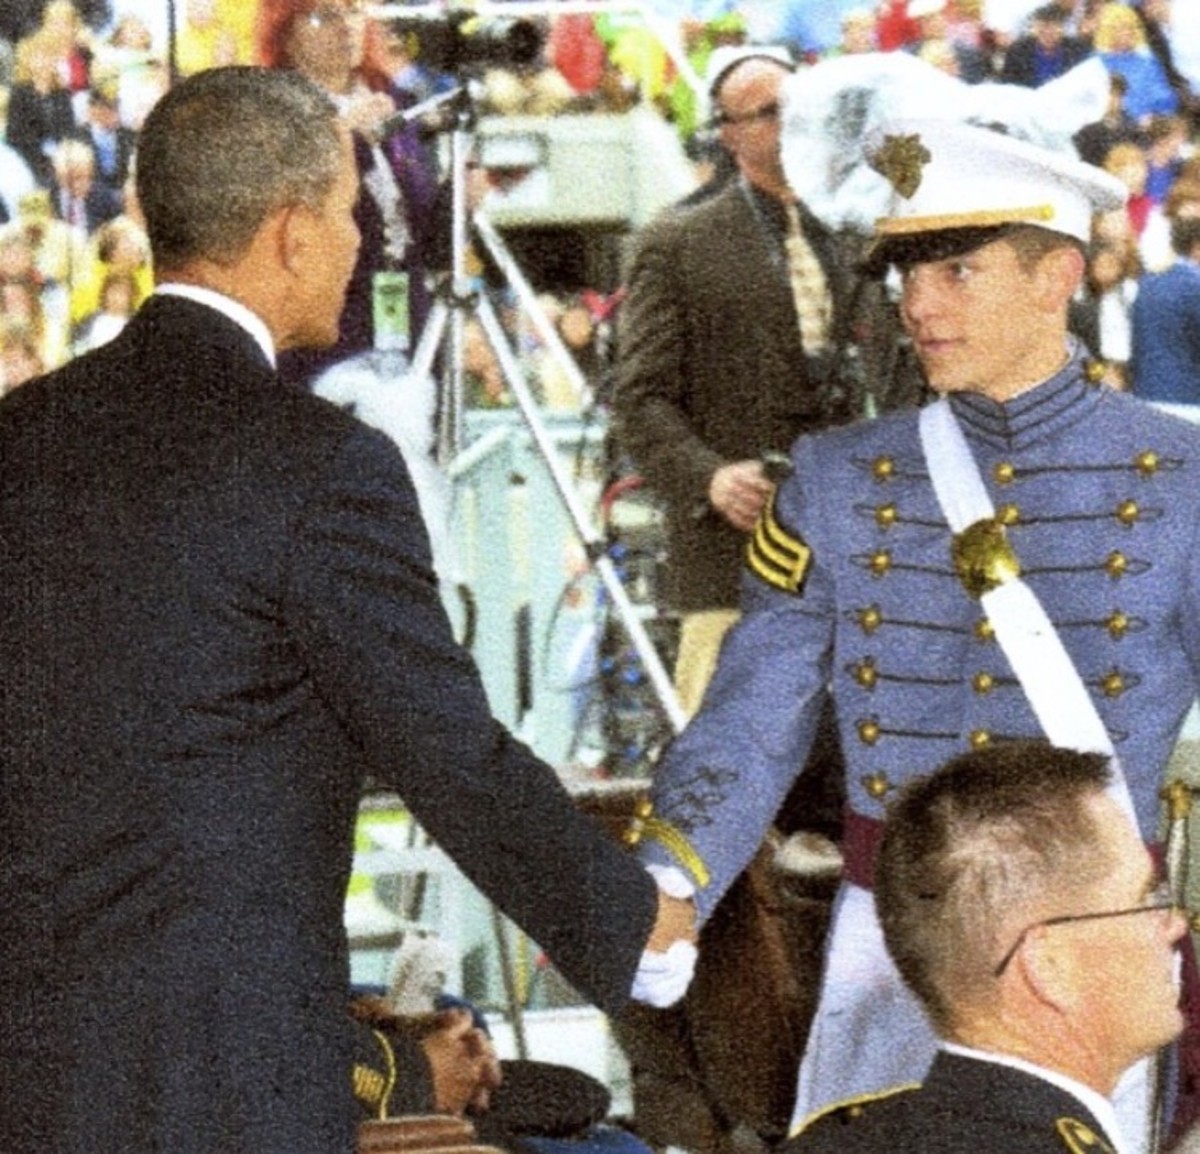 Mike shaking President Obama's hand